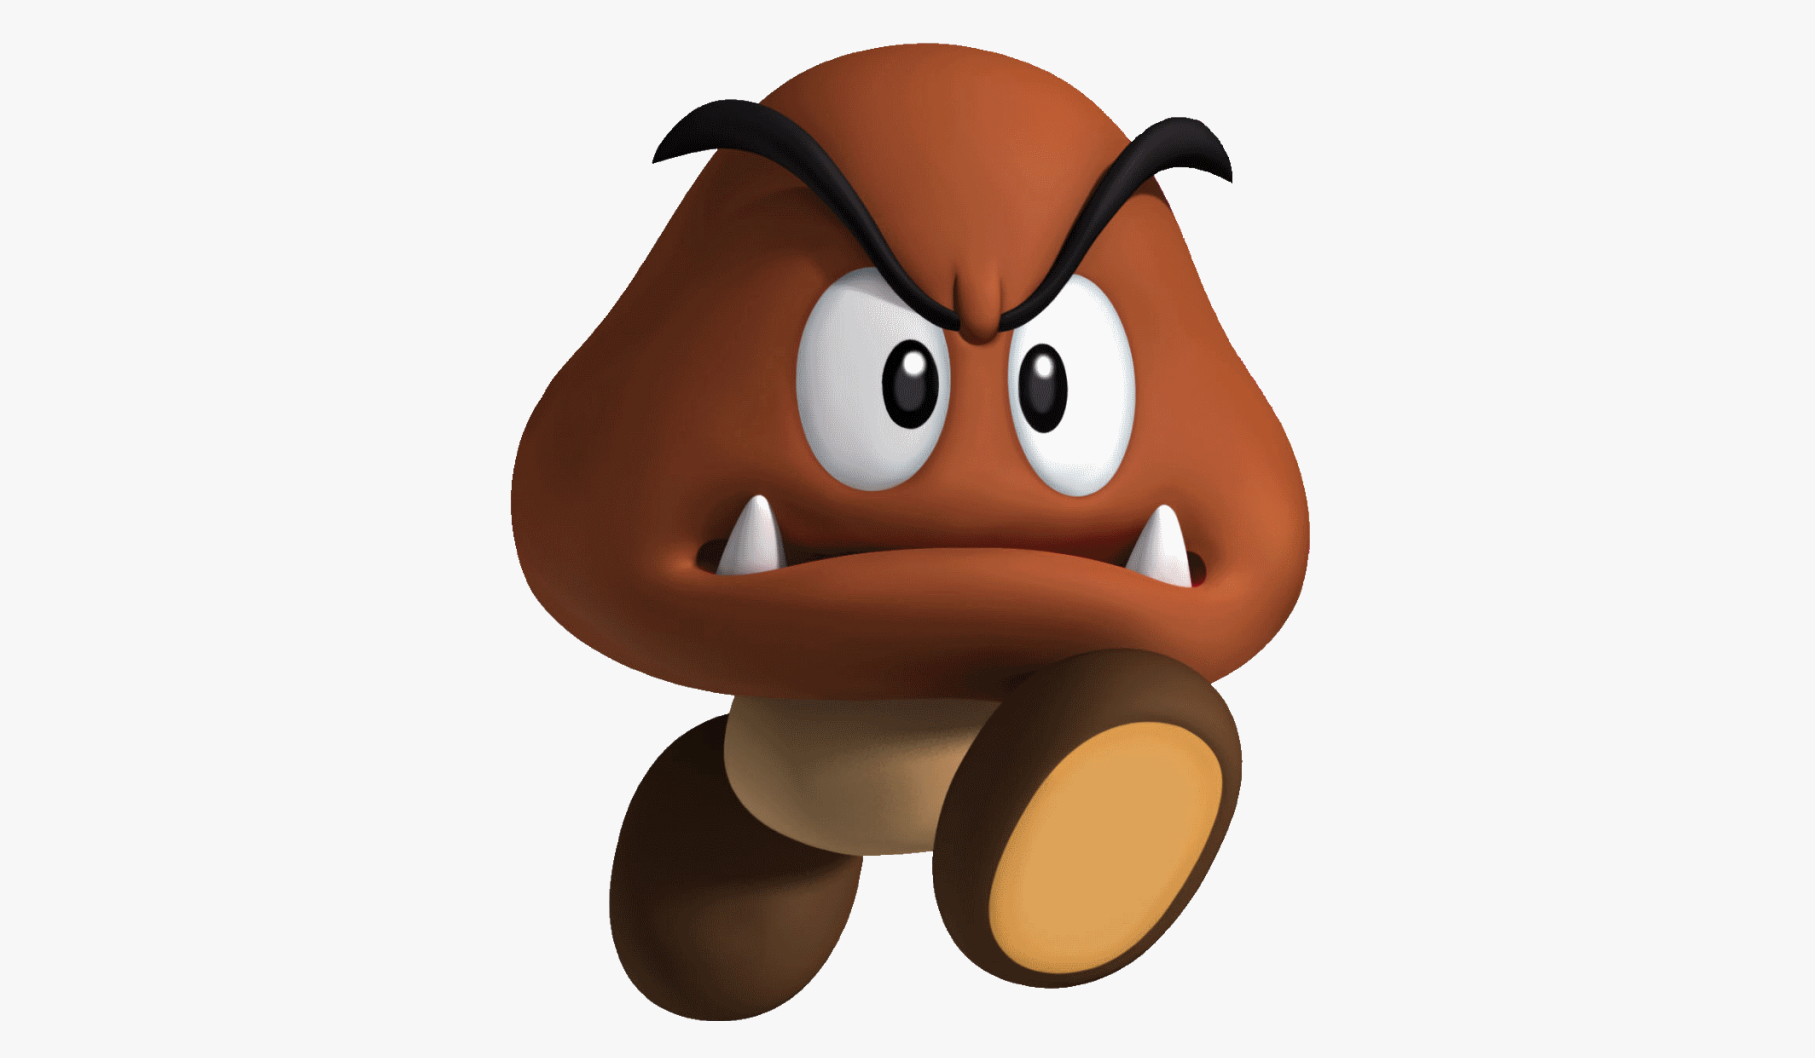 This Hot Cosplayer Dressed Up As A Goomba And I Discovered Some New.